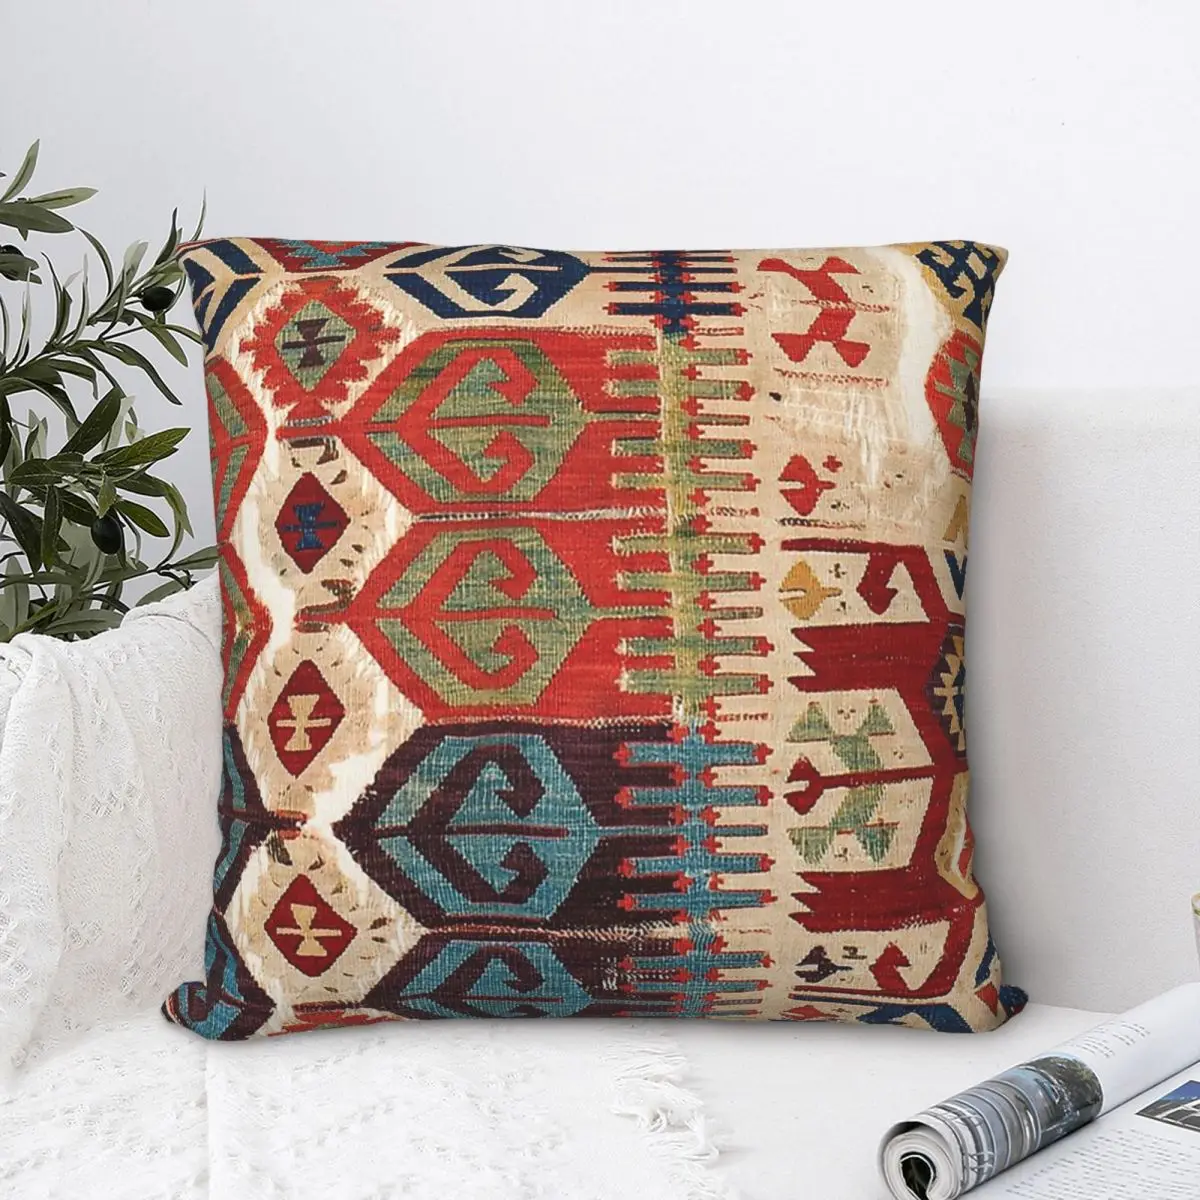 Aksaray Tribal Antique Turkish Kilim Print Throw Pillow Case Navajo Oriental Backpack Cojines Case Soft For Chair Decor